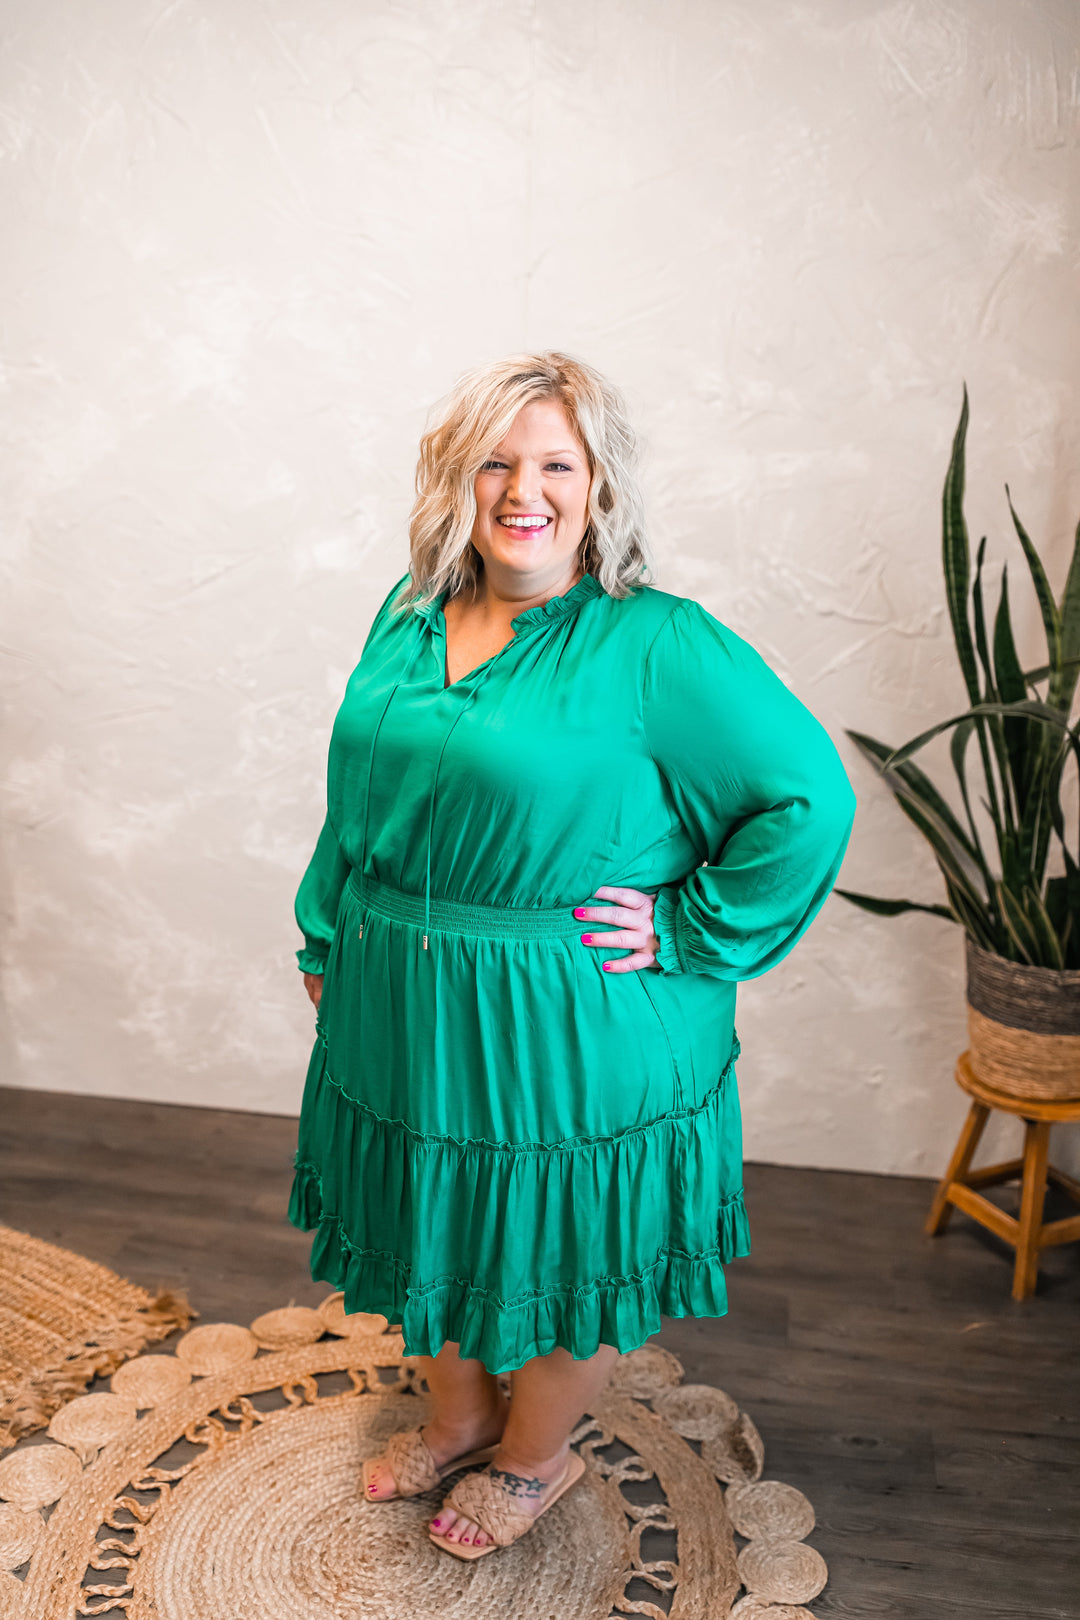 One Eleven Olive Boutique The Charli Dress This show stopper Charli dress is your IT dress for anything and everything this summer!! Wedding? Check. Winery trip? Check. Vacay? Check. Date night? Check. This i